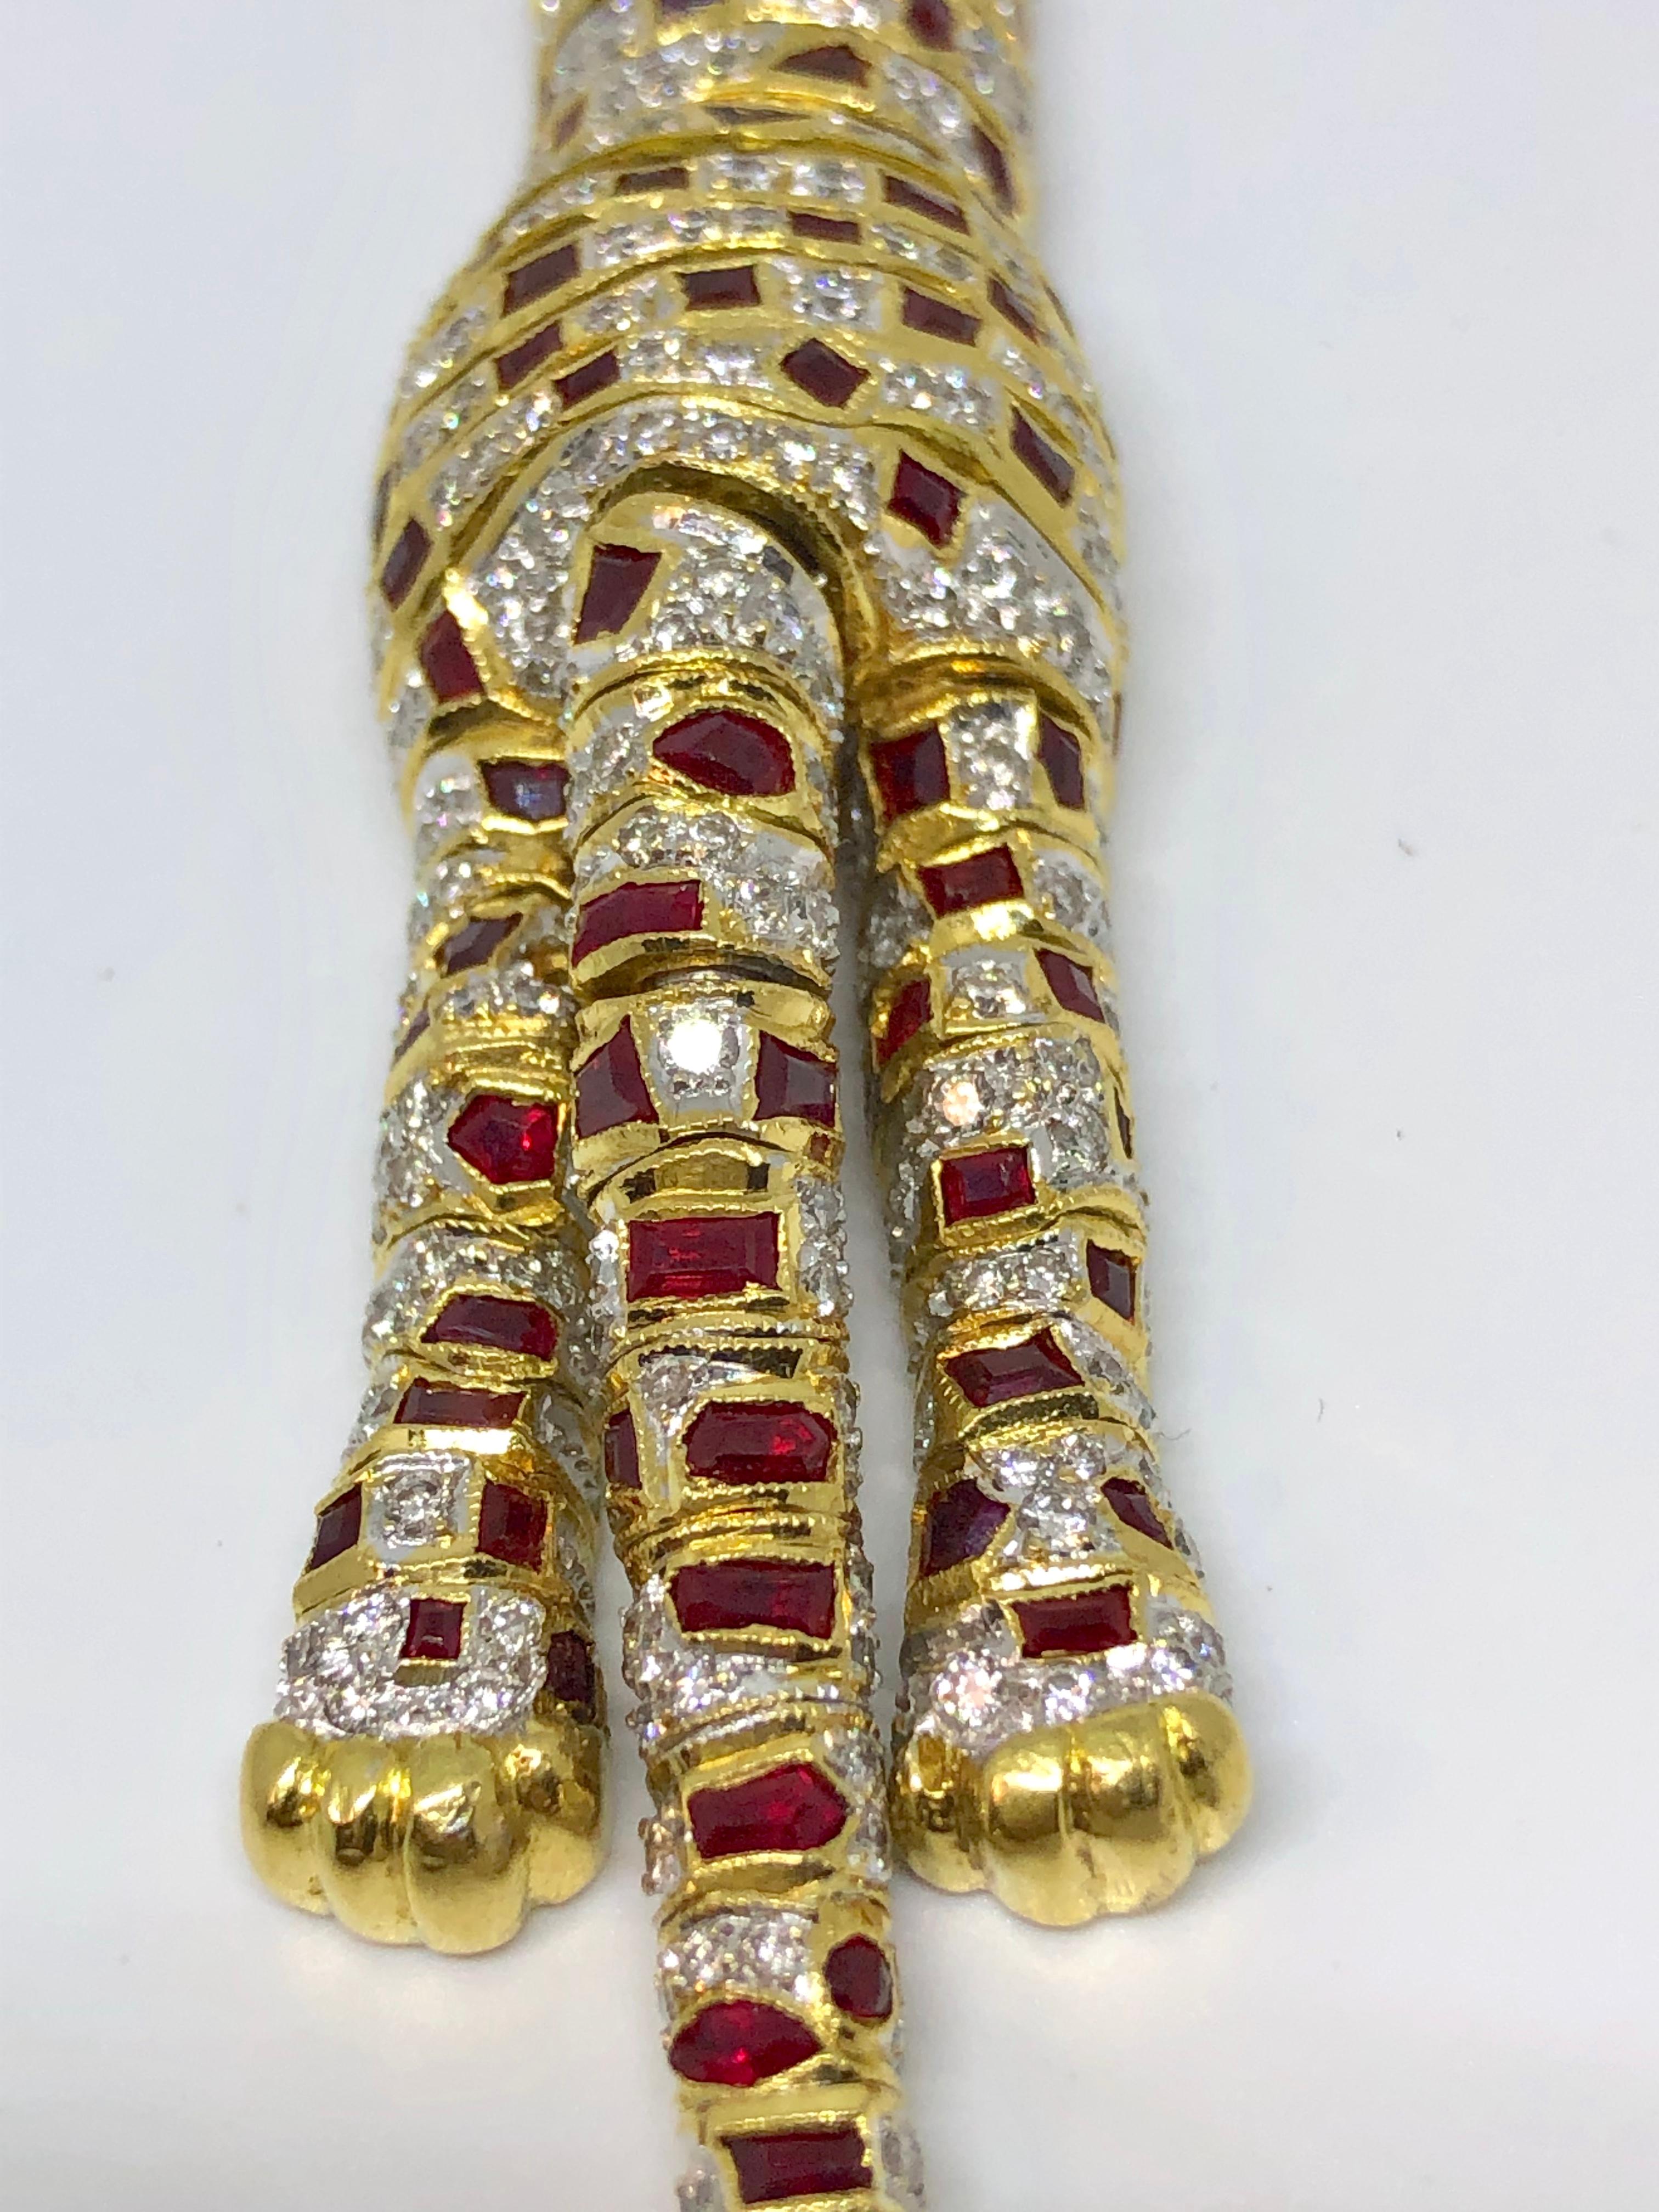 Women's Lady's 18 Karat Yellow Gold Diamond, Ruby and Emerald Panther Bracelet or Brooch